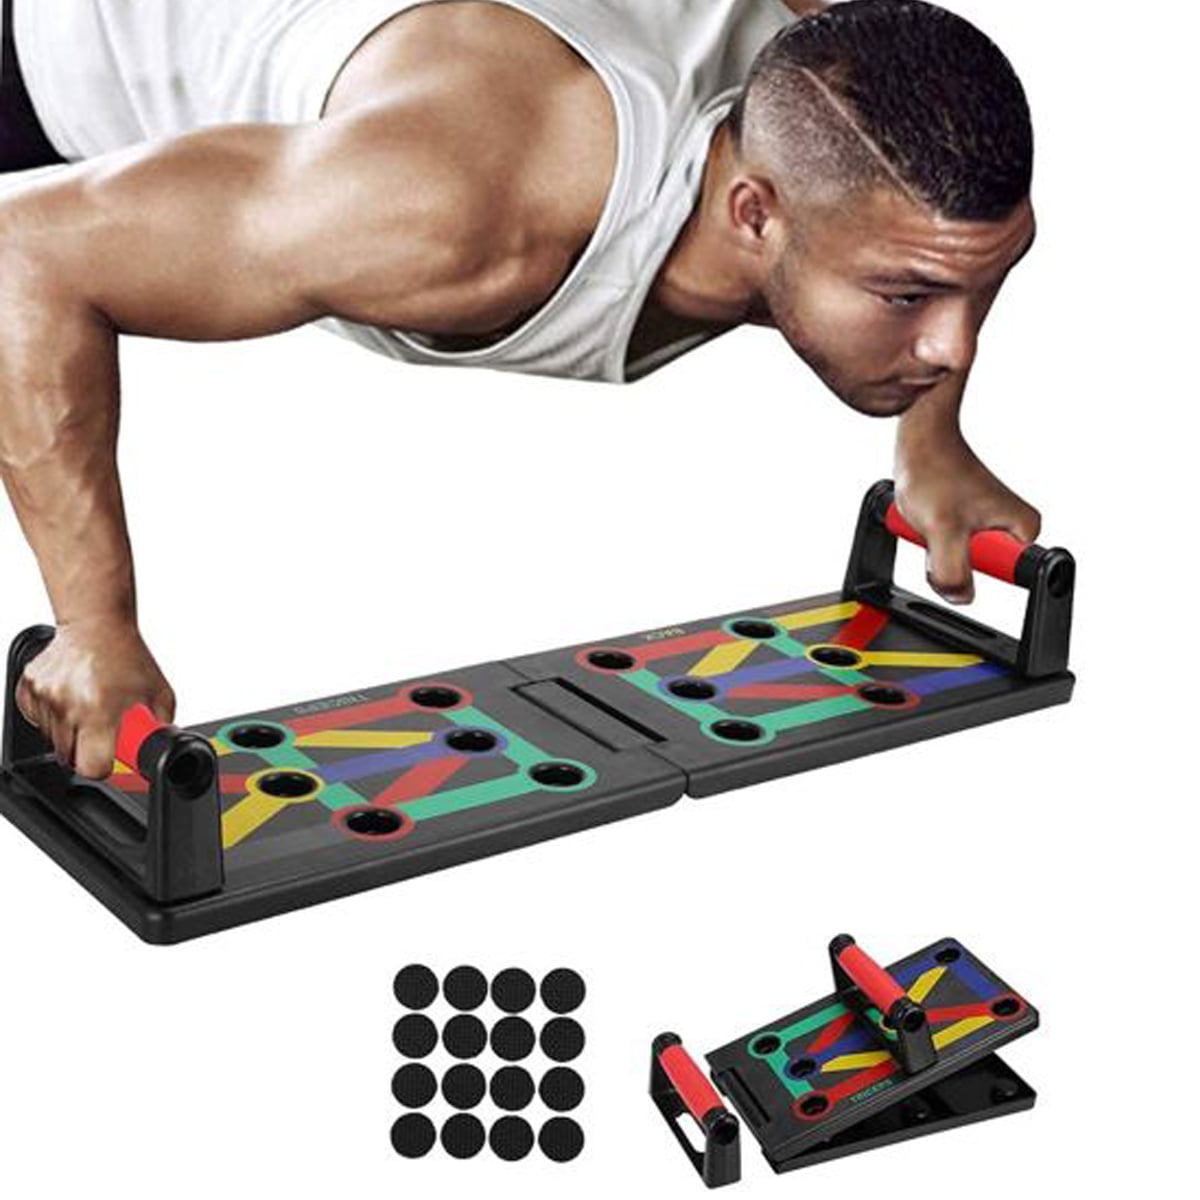 12 In 1 Multifunctional Foldable Home Exercise Fitness Equipment Push Up Bars Suitable for Men to Exercise at Home and Outdoors. N\W Press Up Board Portable Push Up Training Frame 